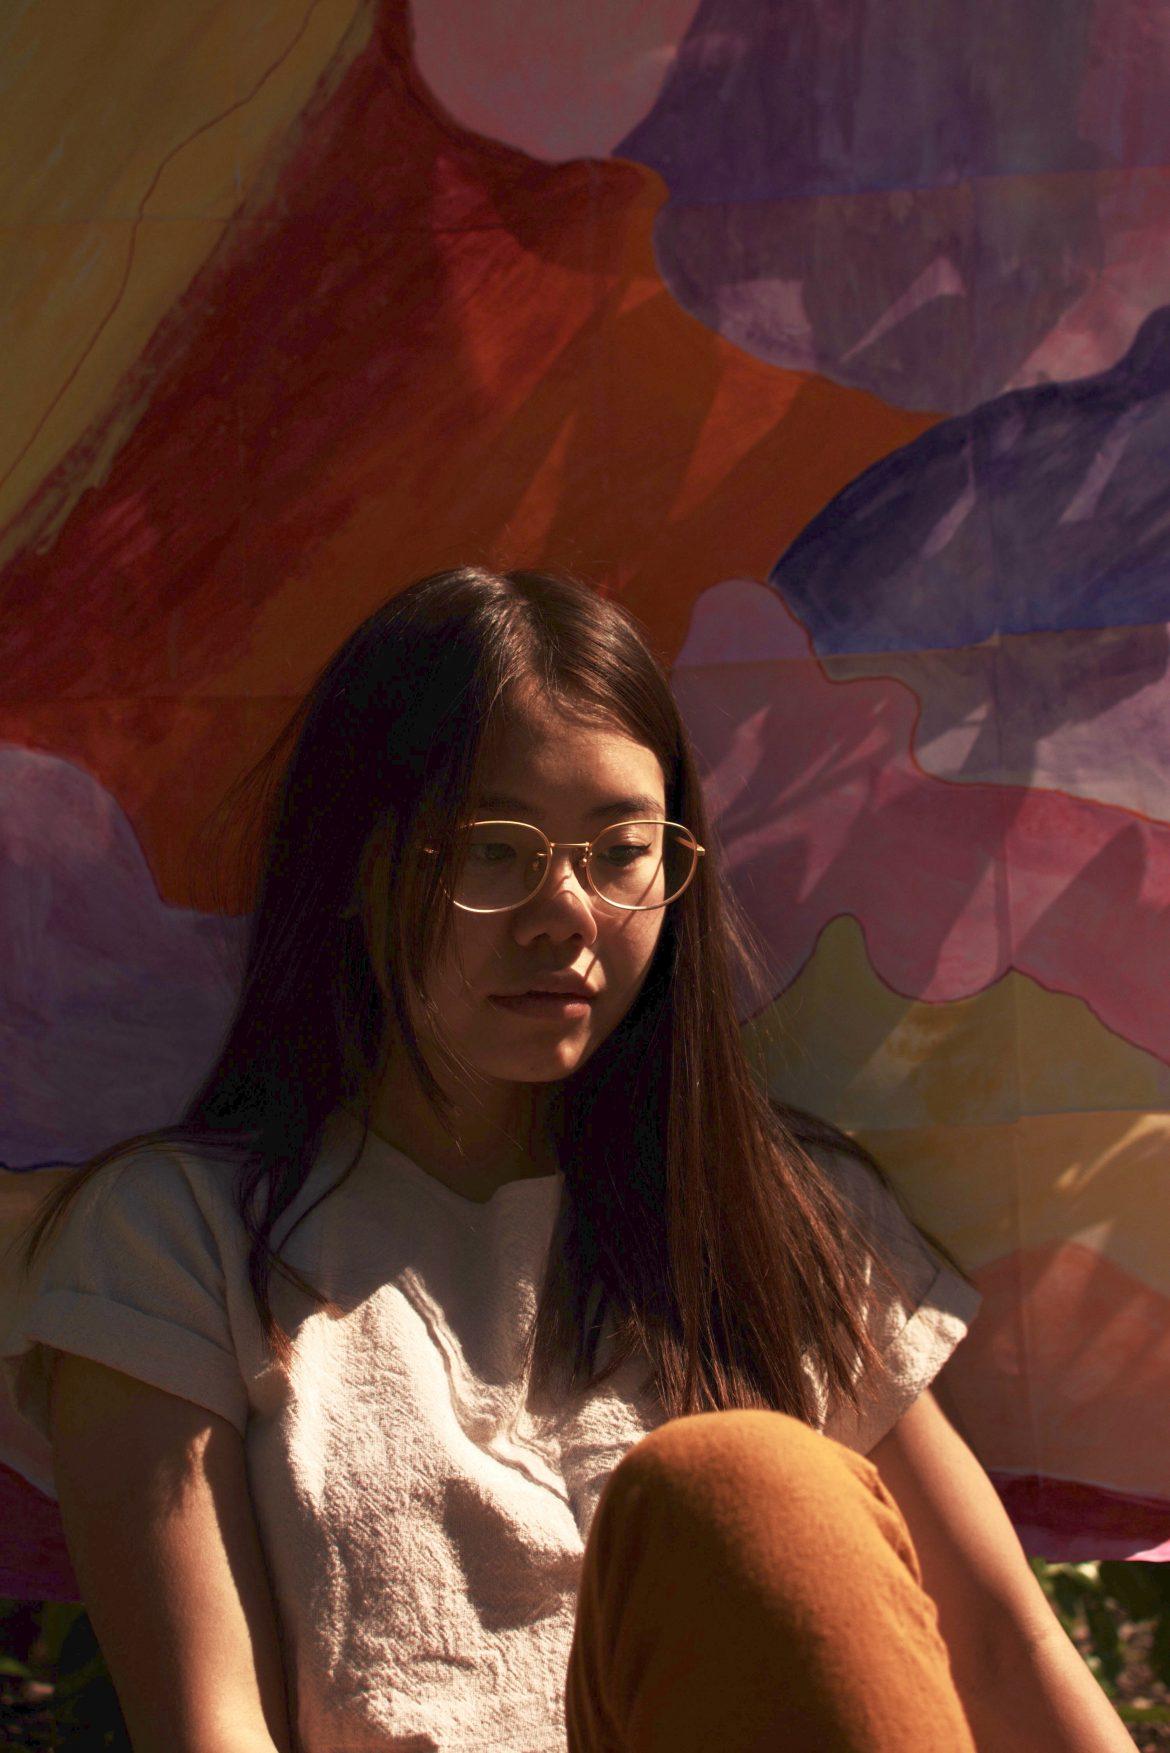 Trina, a young woman with black hair and glasses sits in front of a colorful abstract painting